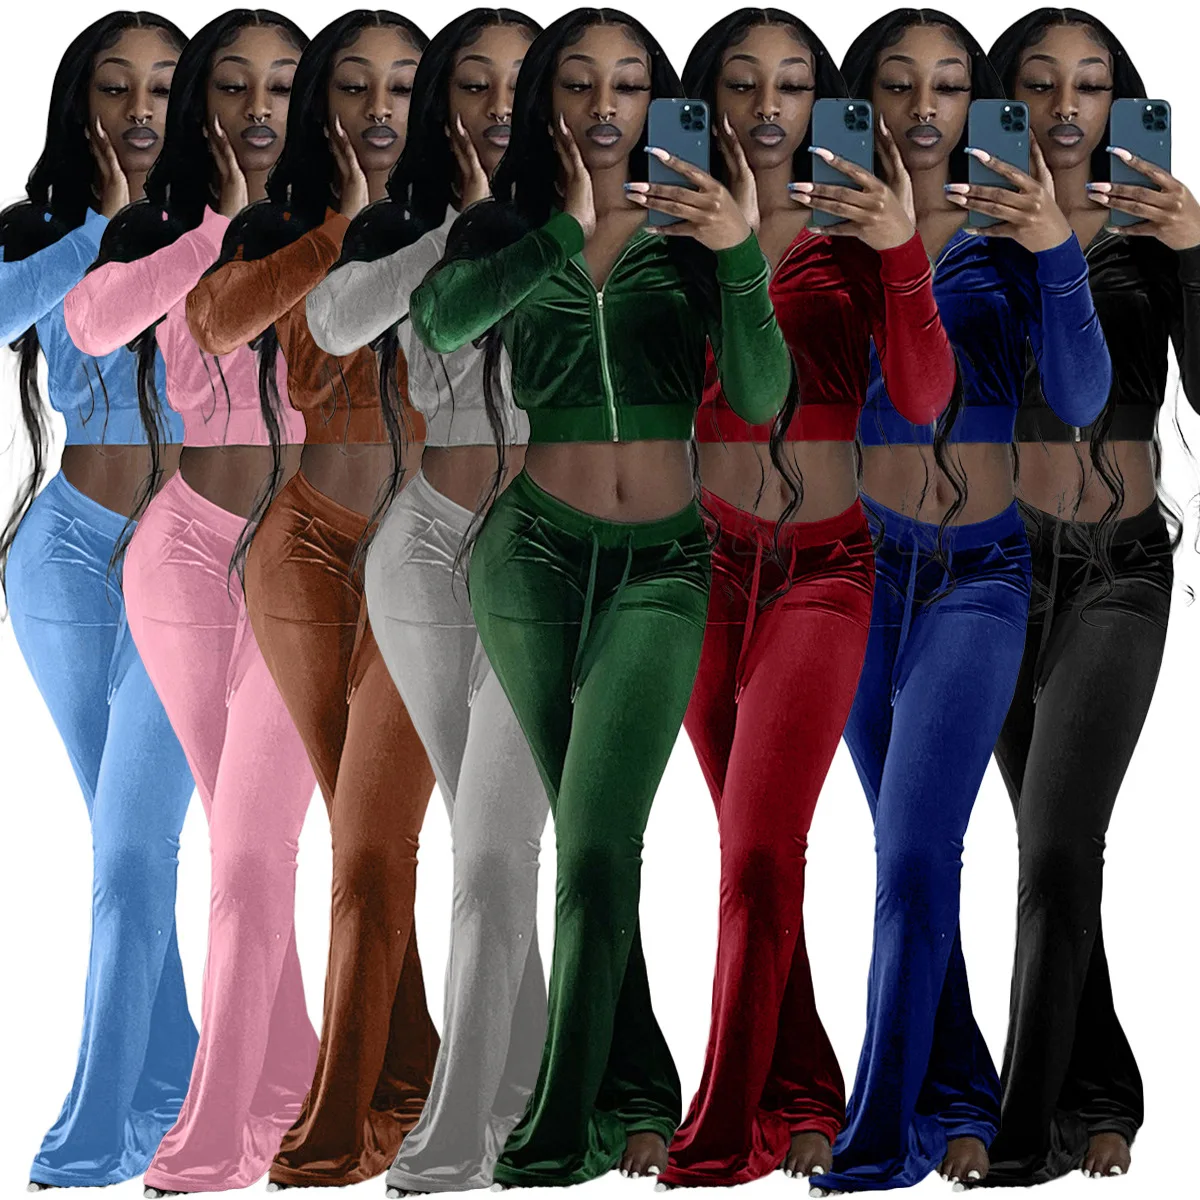 2021 Fall women clothing velour tracksuit long sleeves hoodie sweatsuit crop top 2 piece pants set outfit  velvet two piece set (1600255185245)